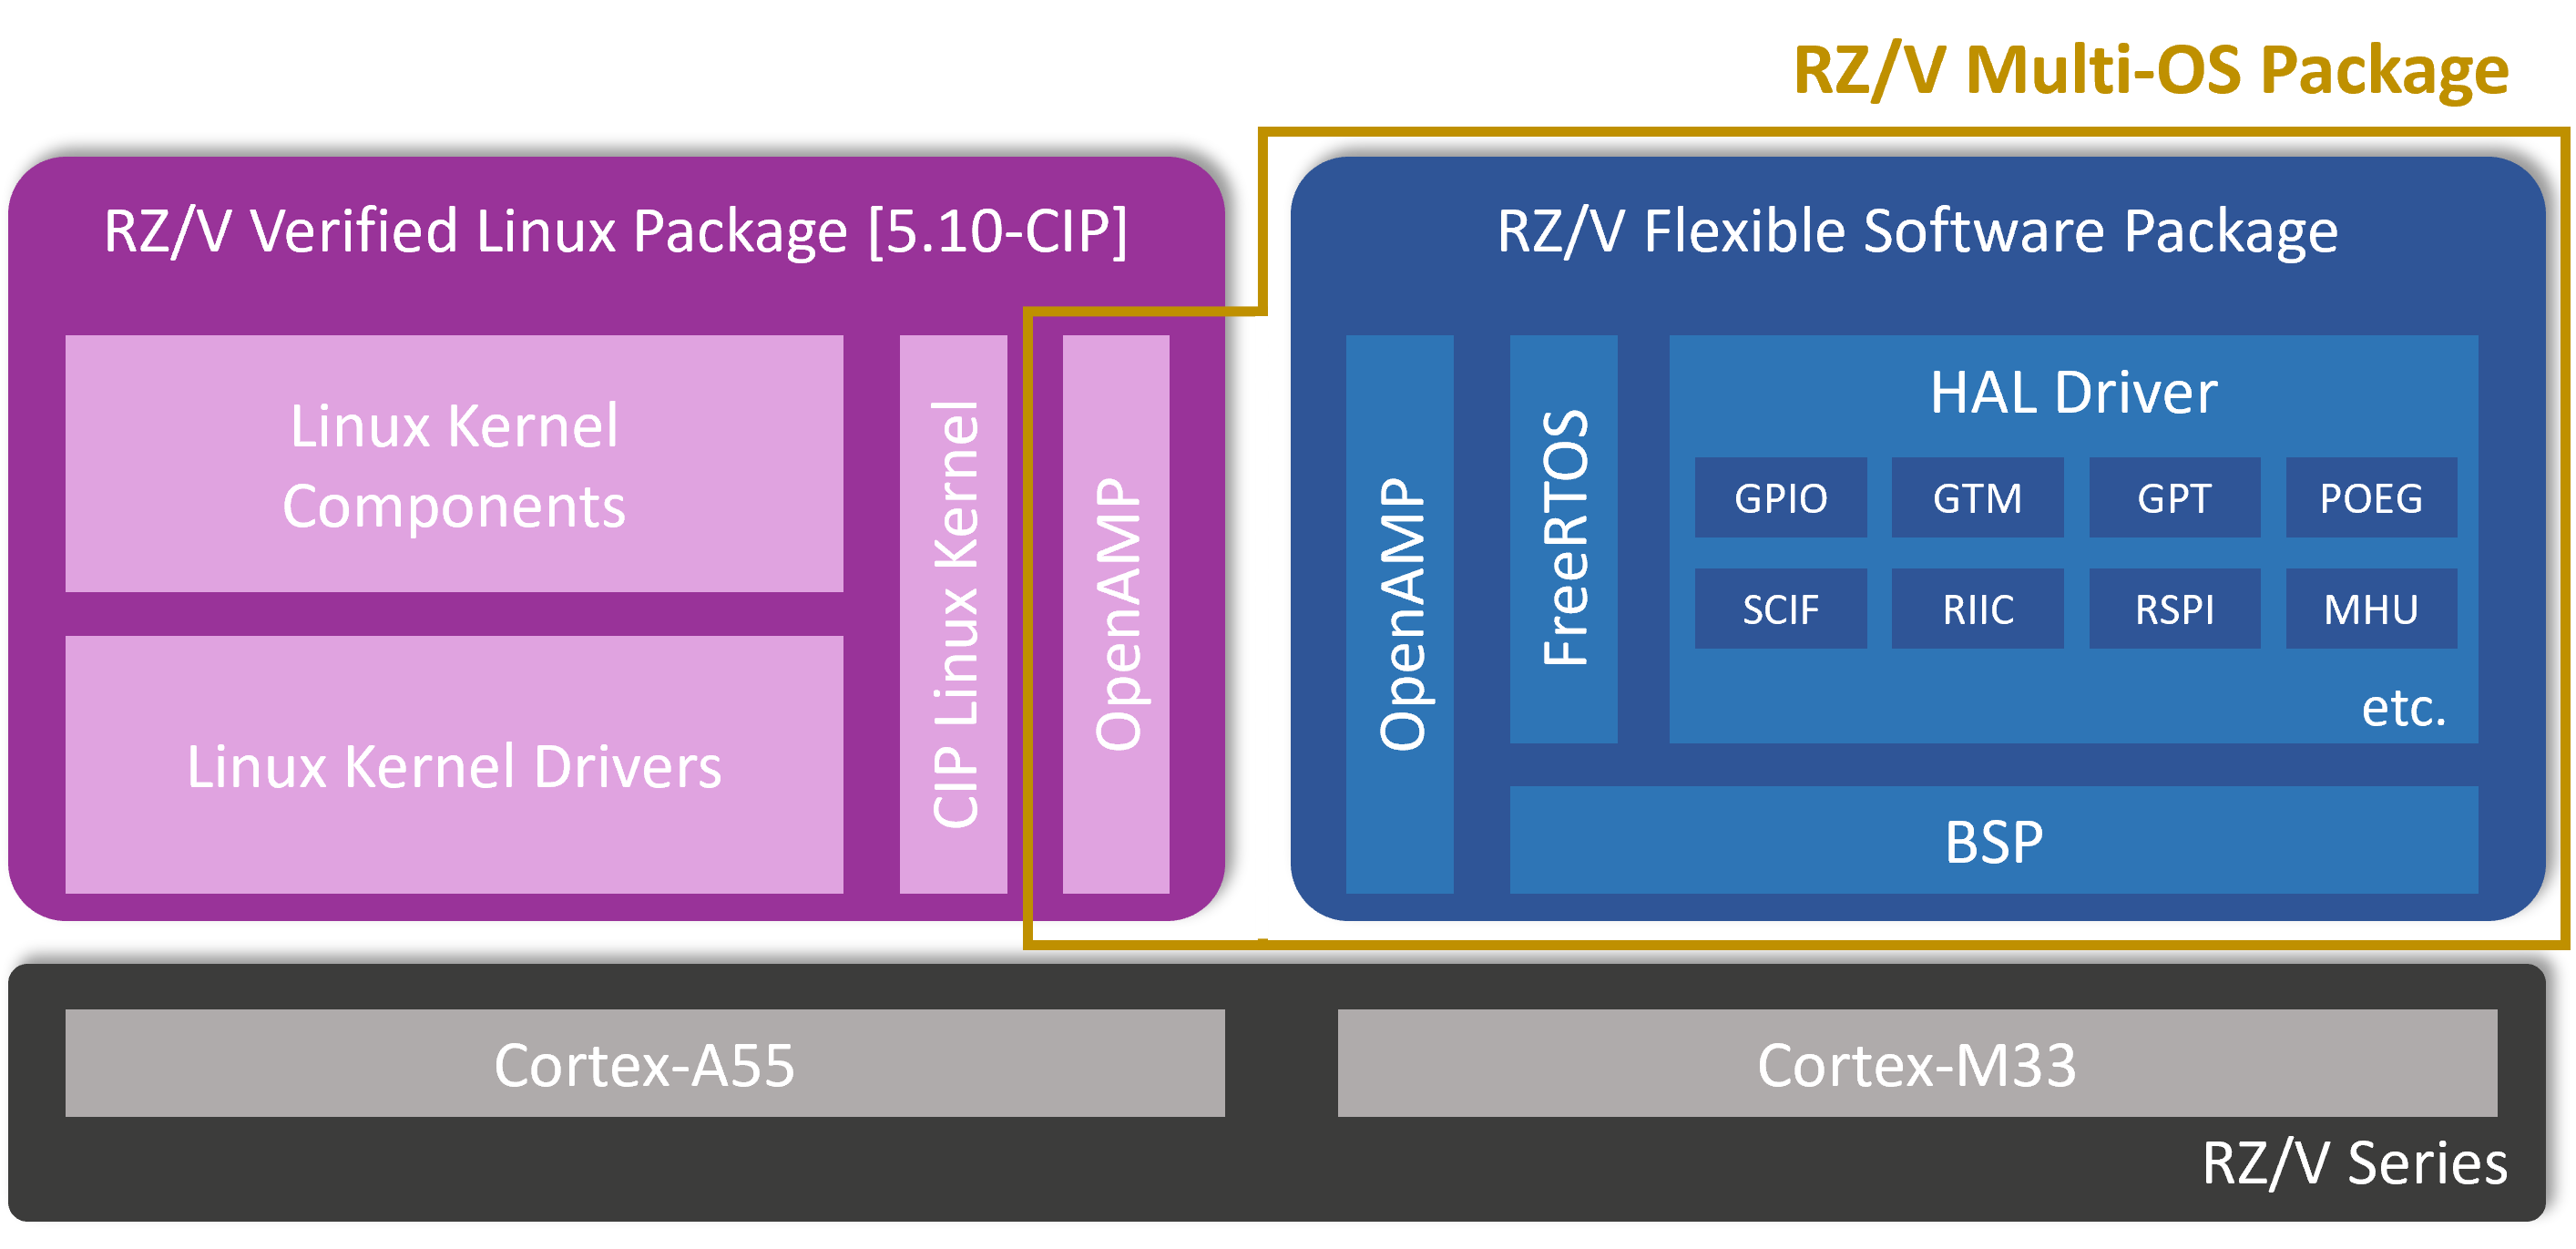 RZ/V Multi-OS Package System Architecture